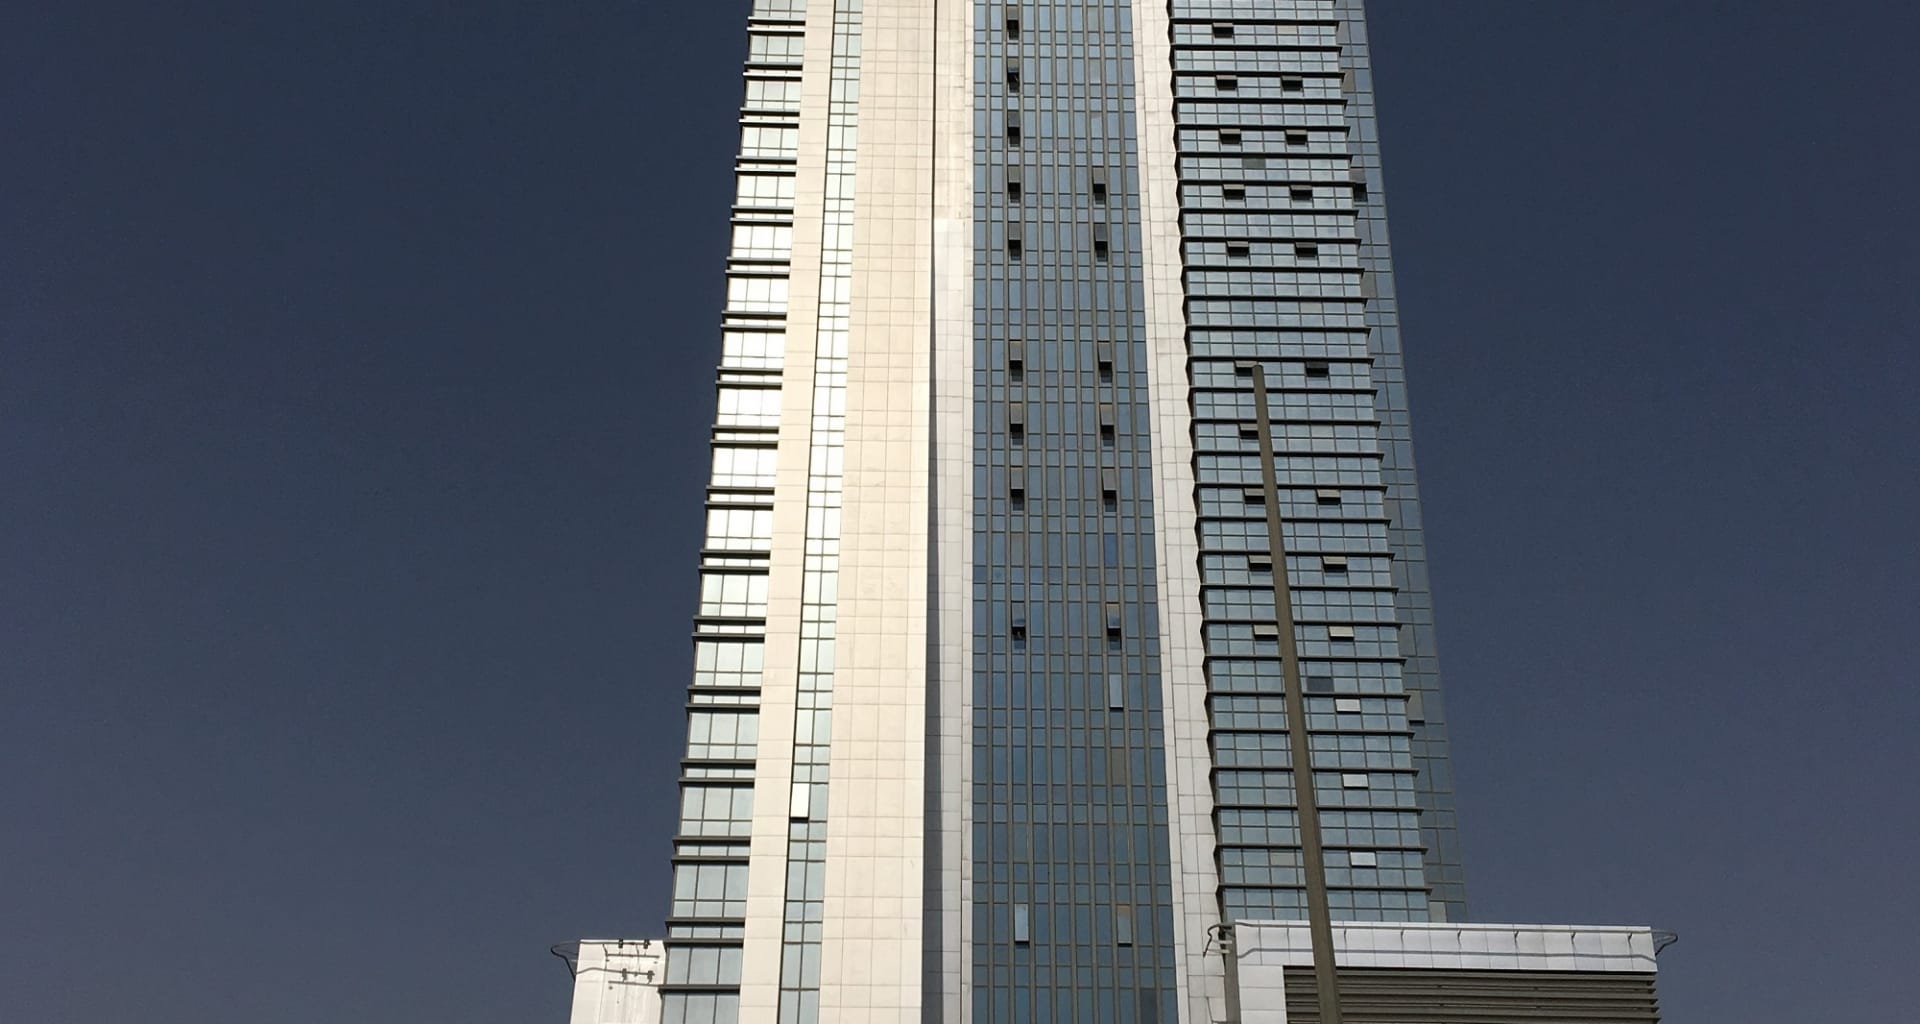 The 37-storey AKH Tower